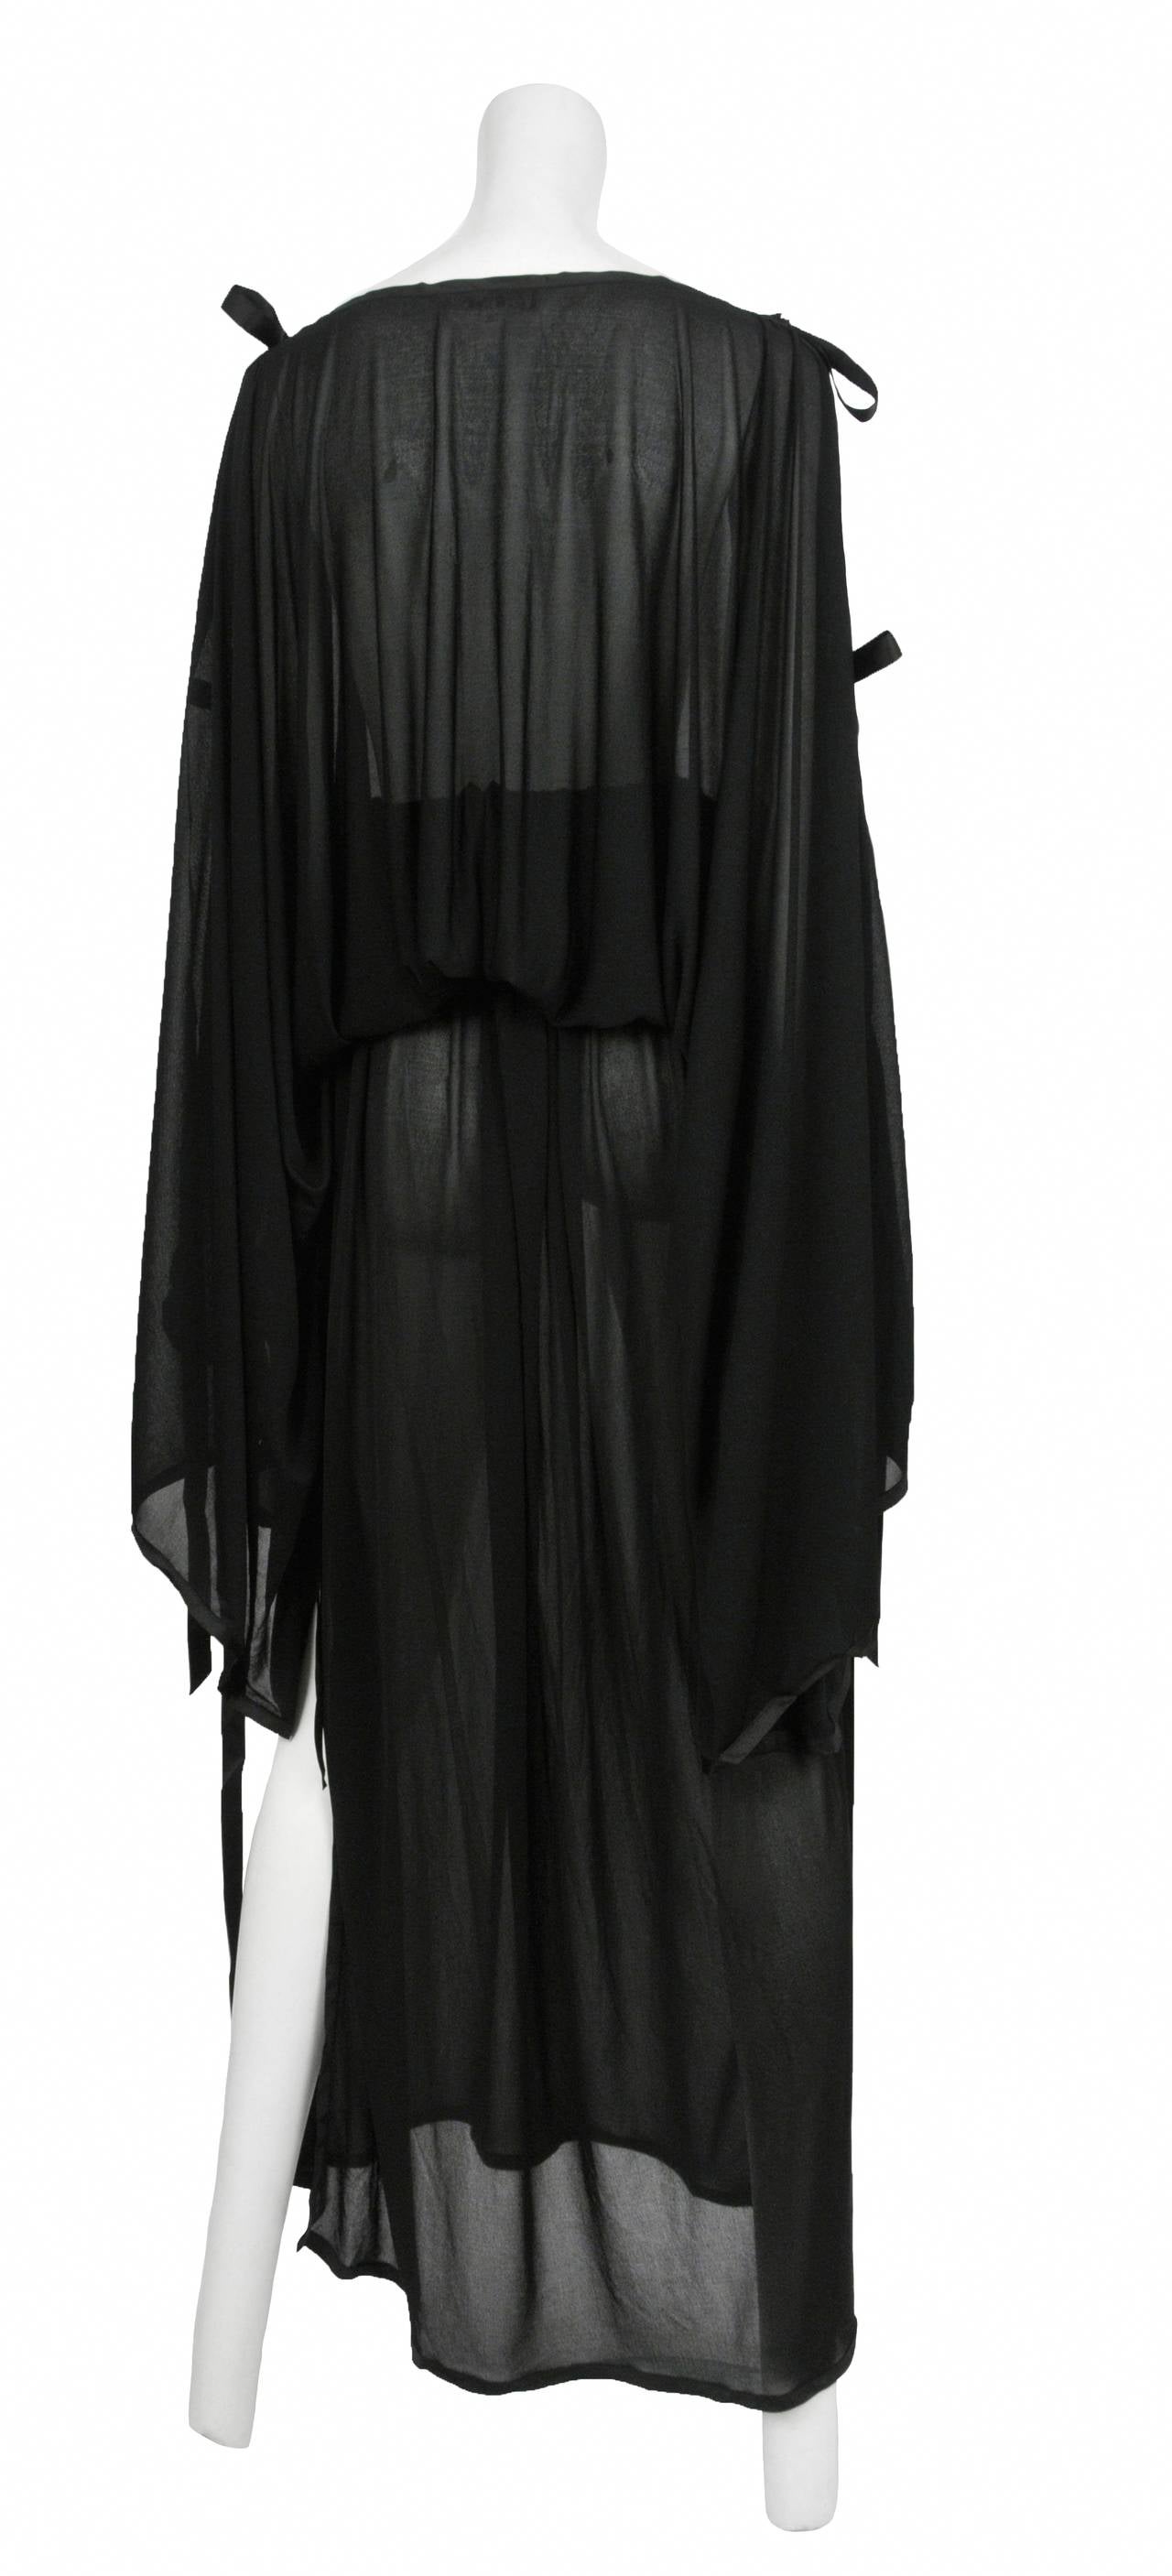 Vintage Yves Saint Laurent YSL black sheer very fine jersey kimono sleeve two piece ensemble. The top has large kimono style sleeves with black satin ribbon closure and gathered waist. The skirt has a shirrred waistband with straight skirt, side